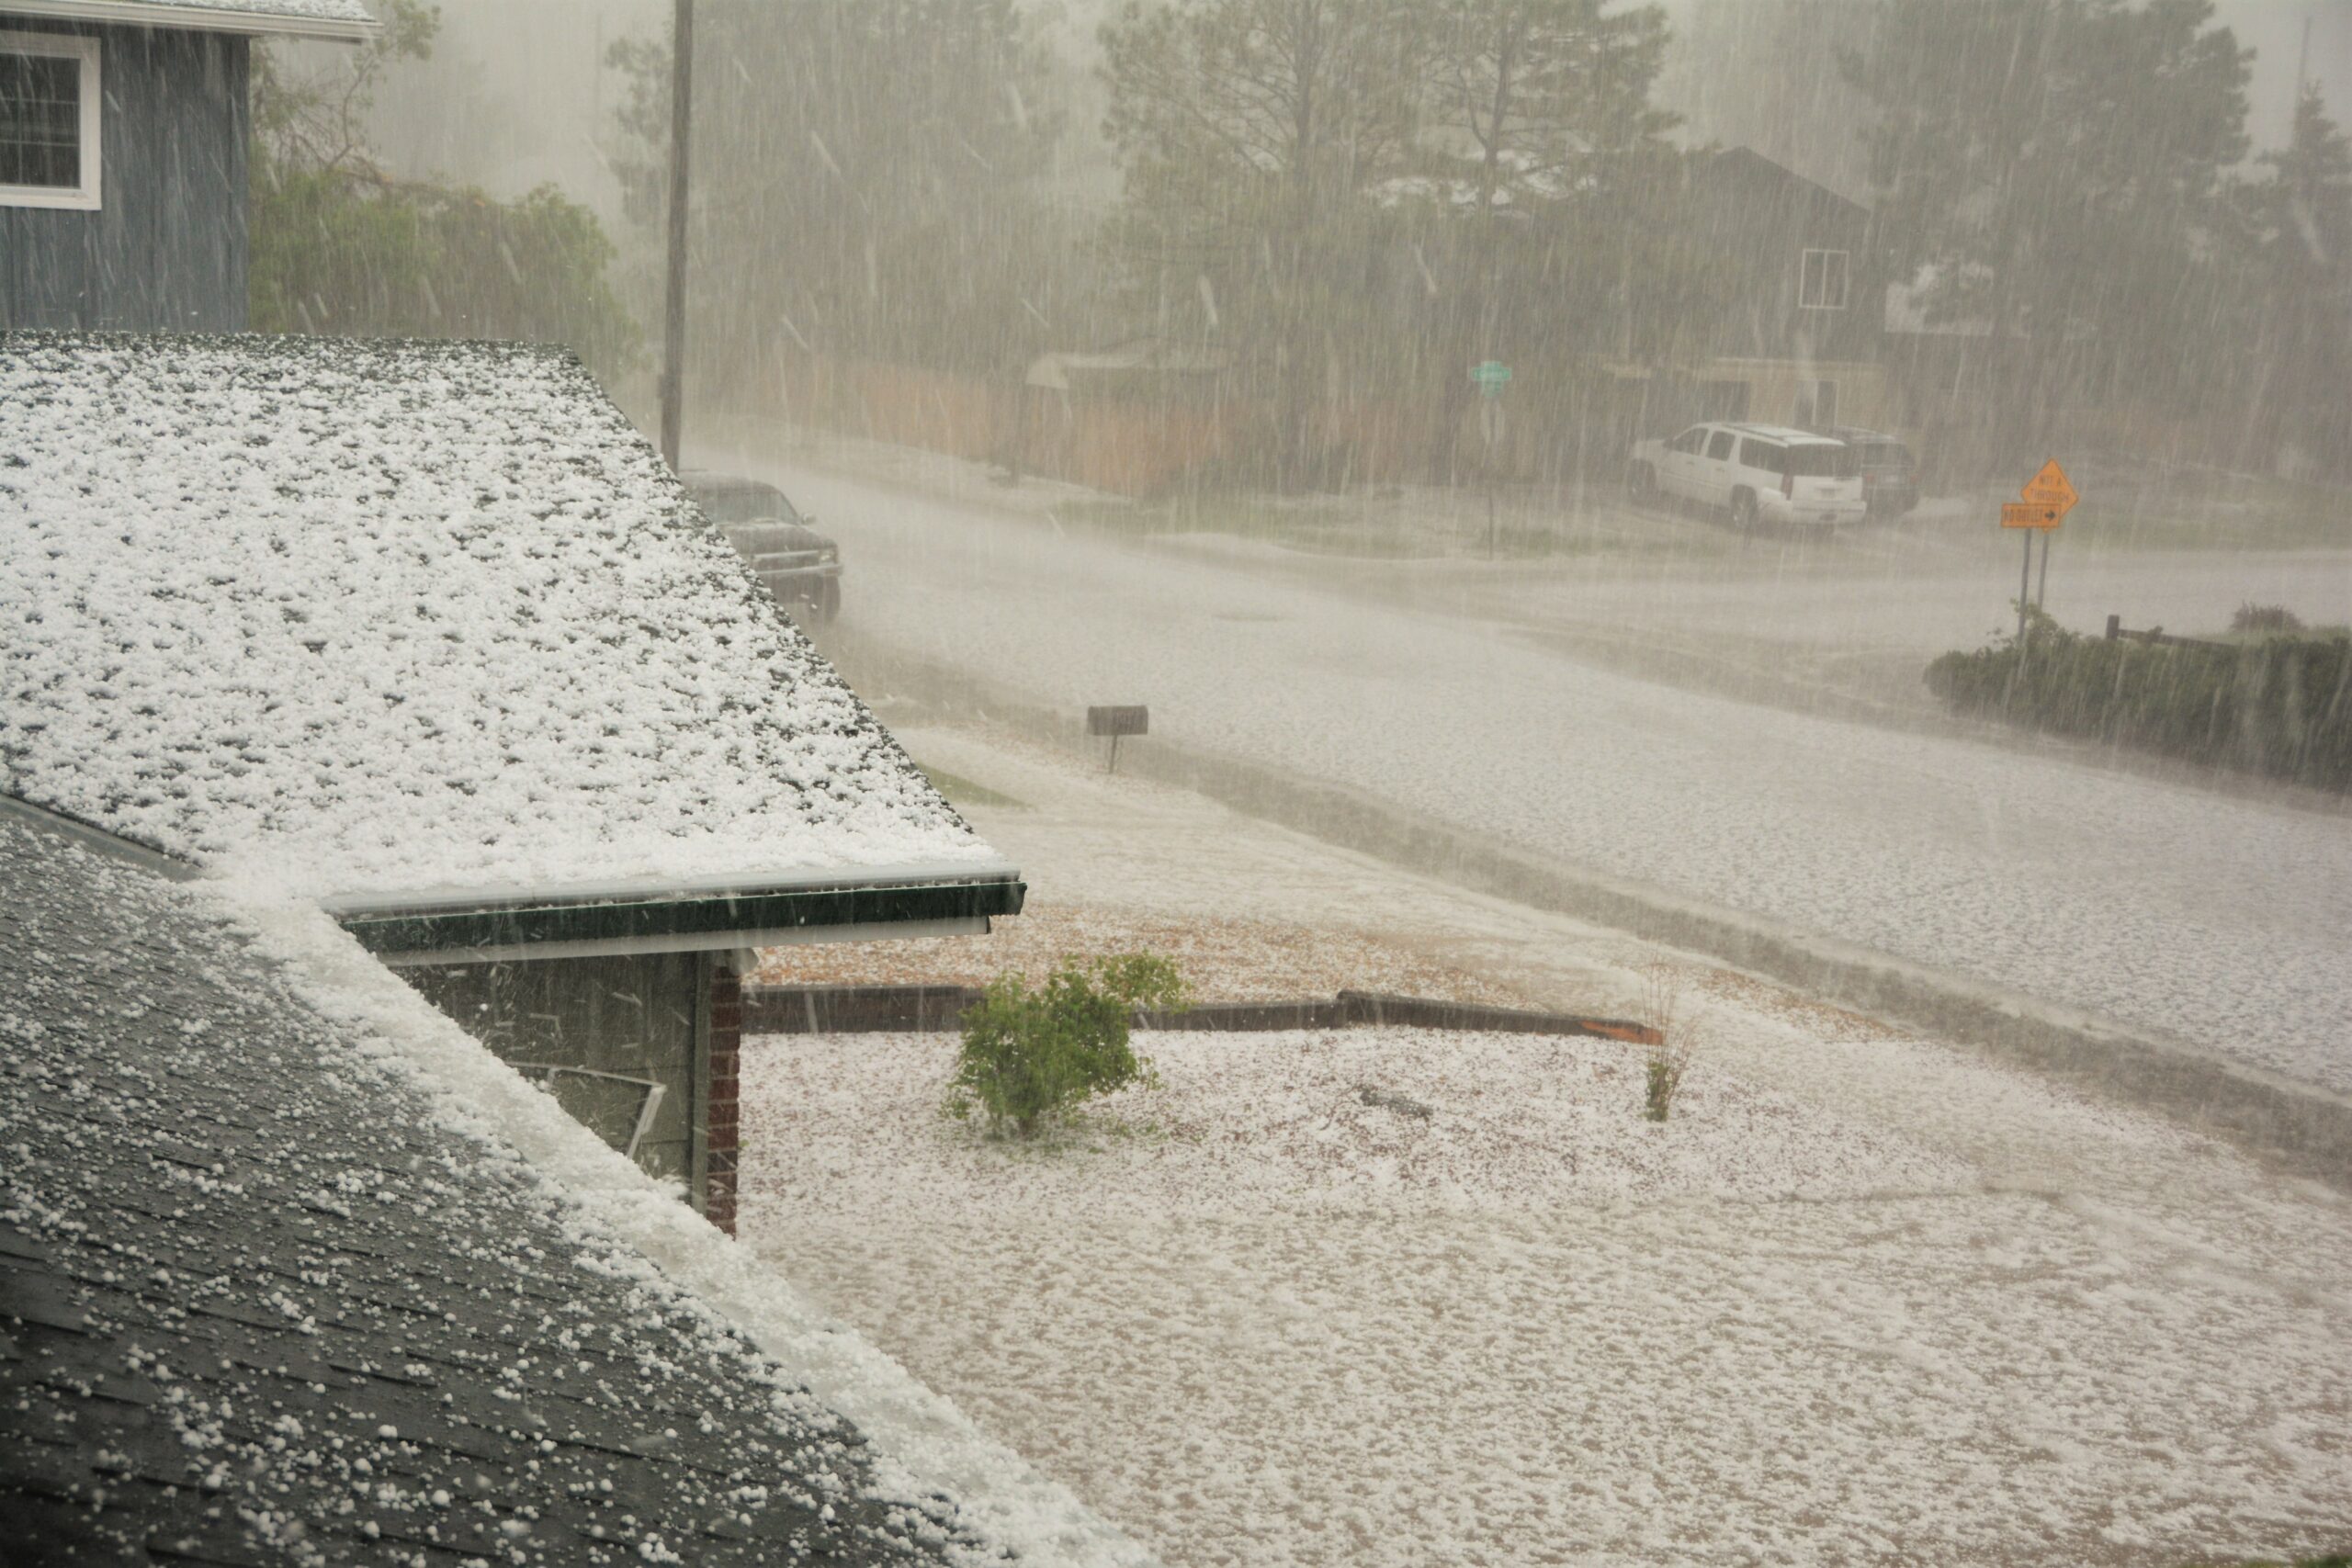 Hailstones all over a roof of a house and neighbourhood street.